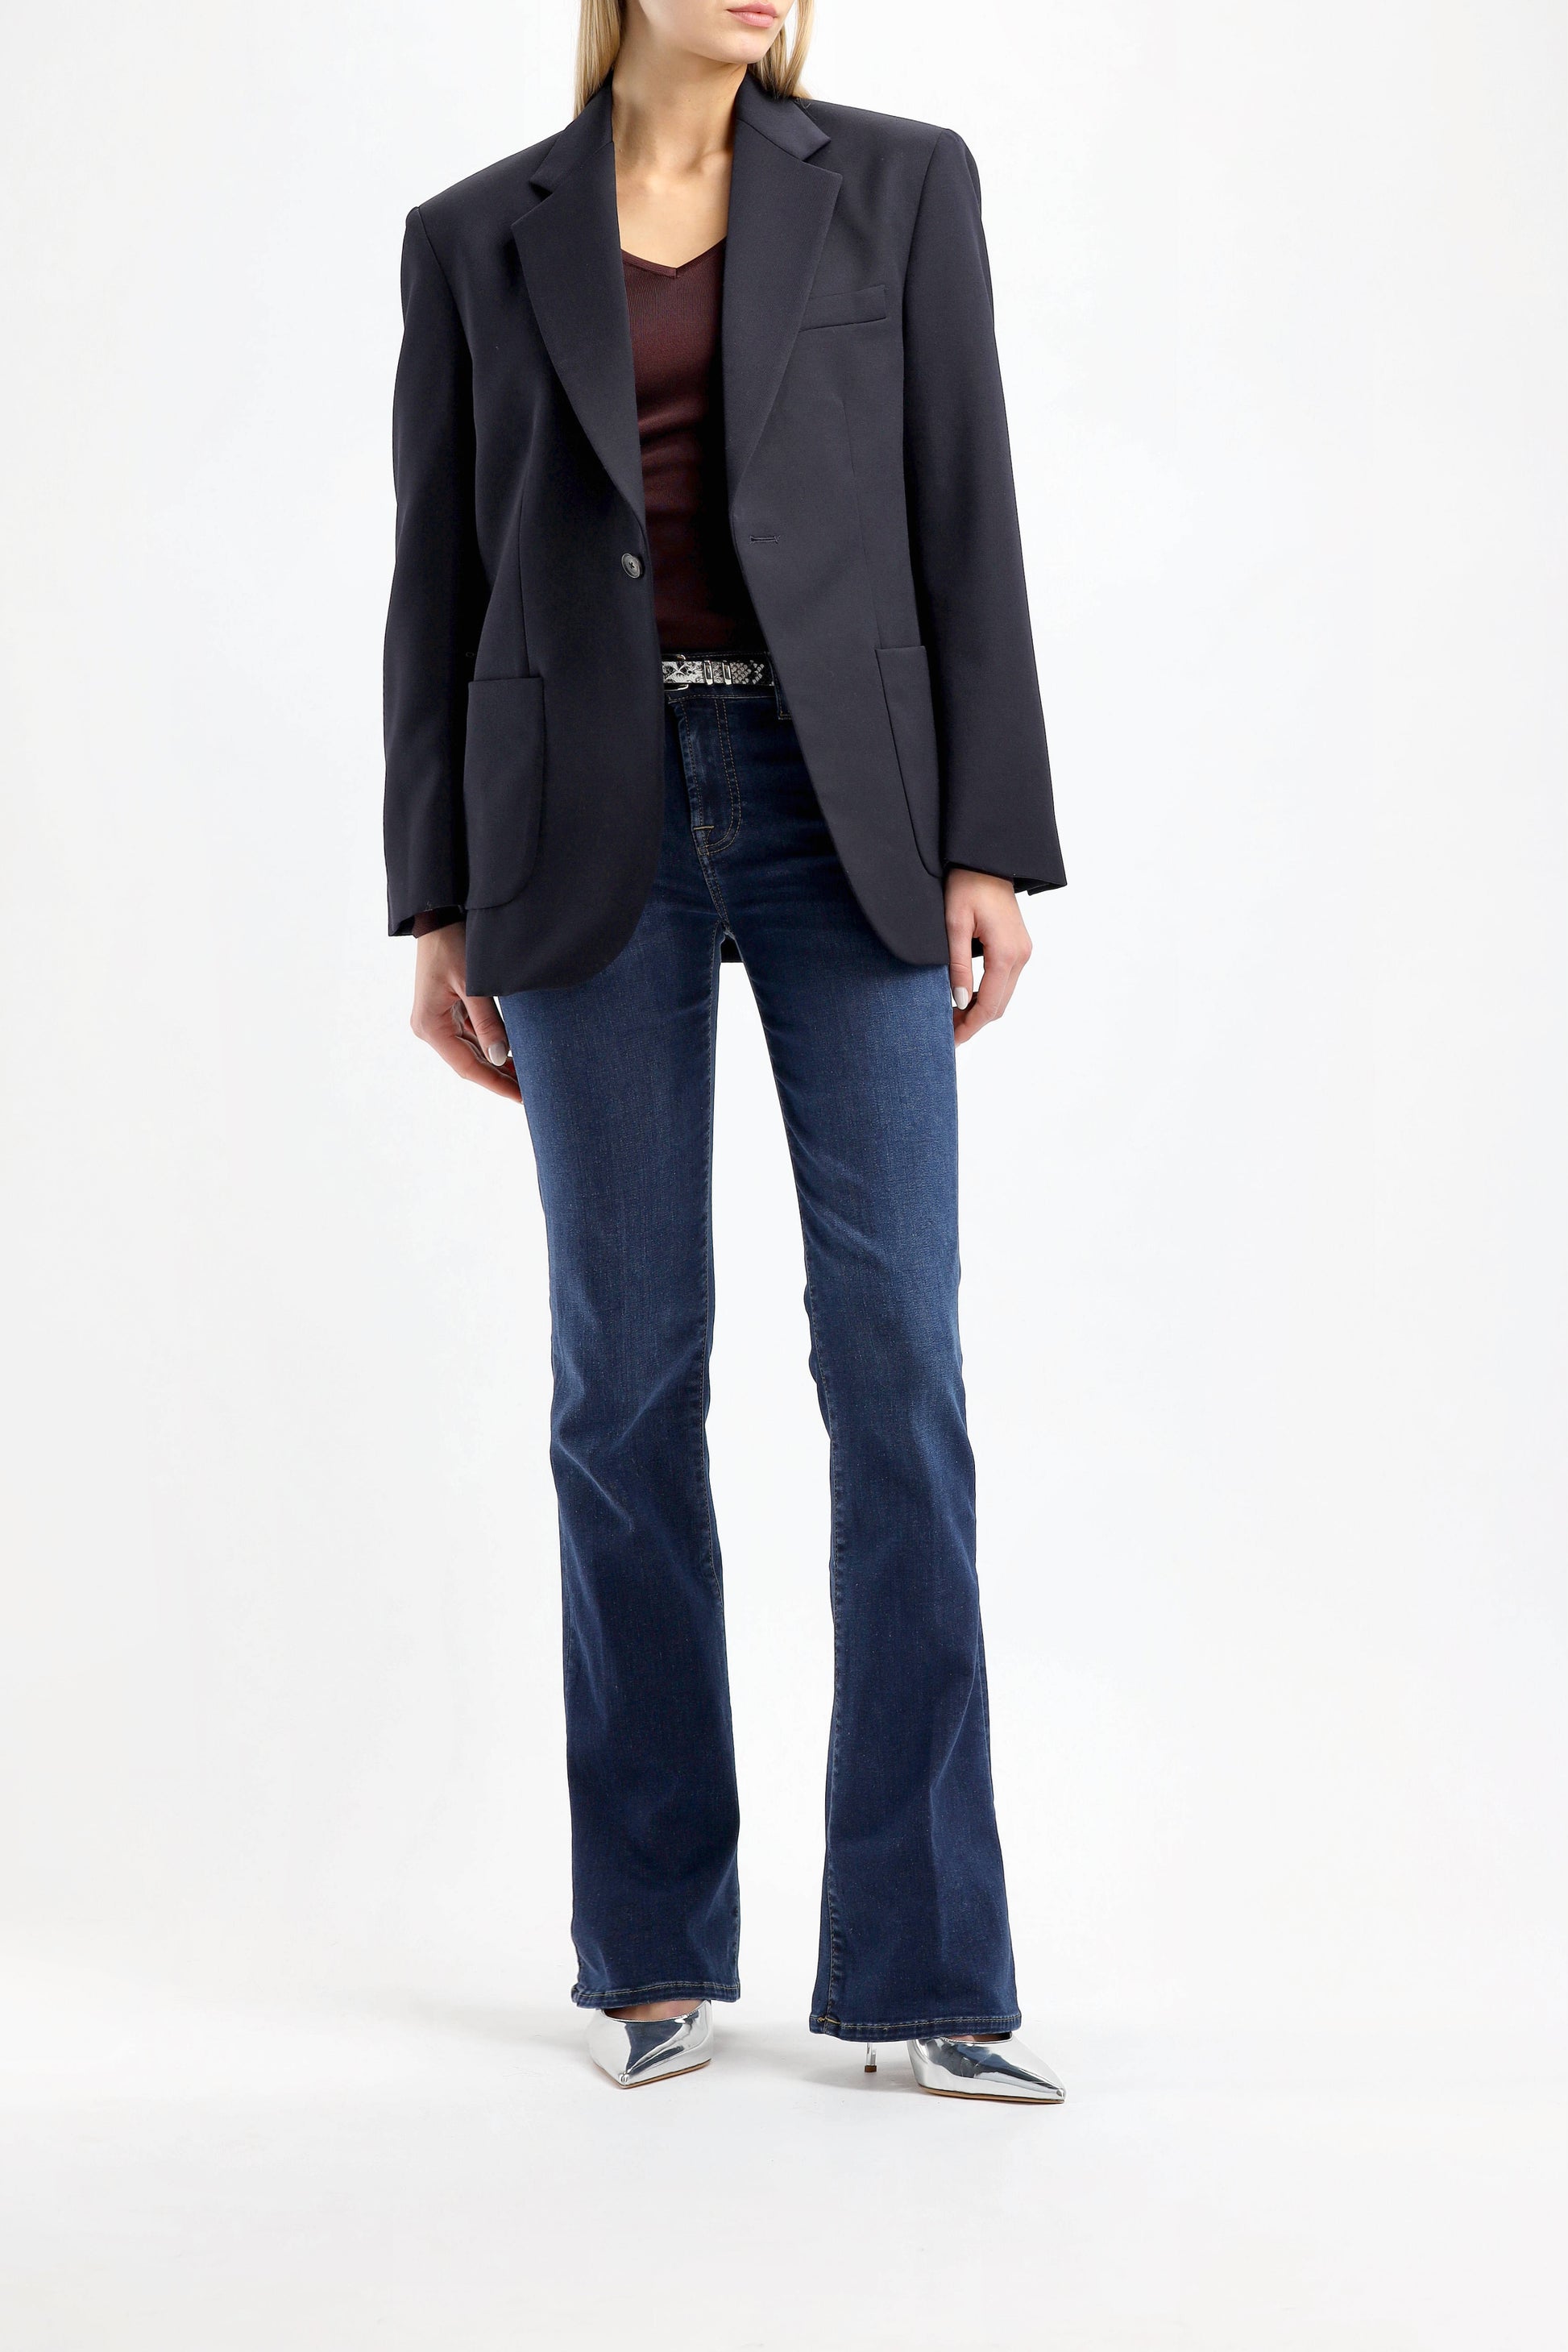 Jeans Bootcut Bair in Dark Blue7 For All Mankind - Anita Hass